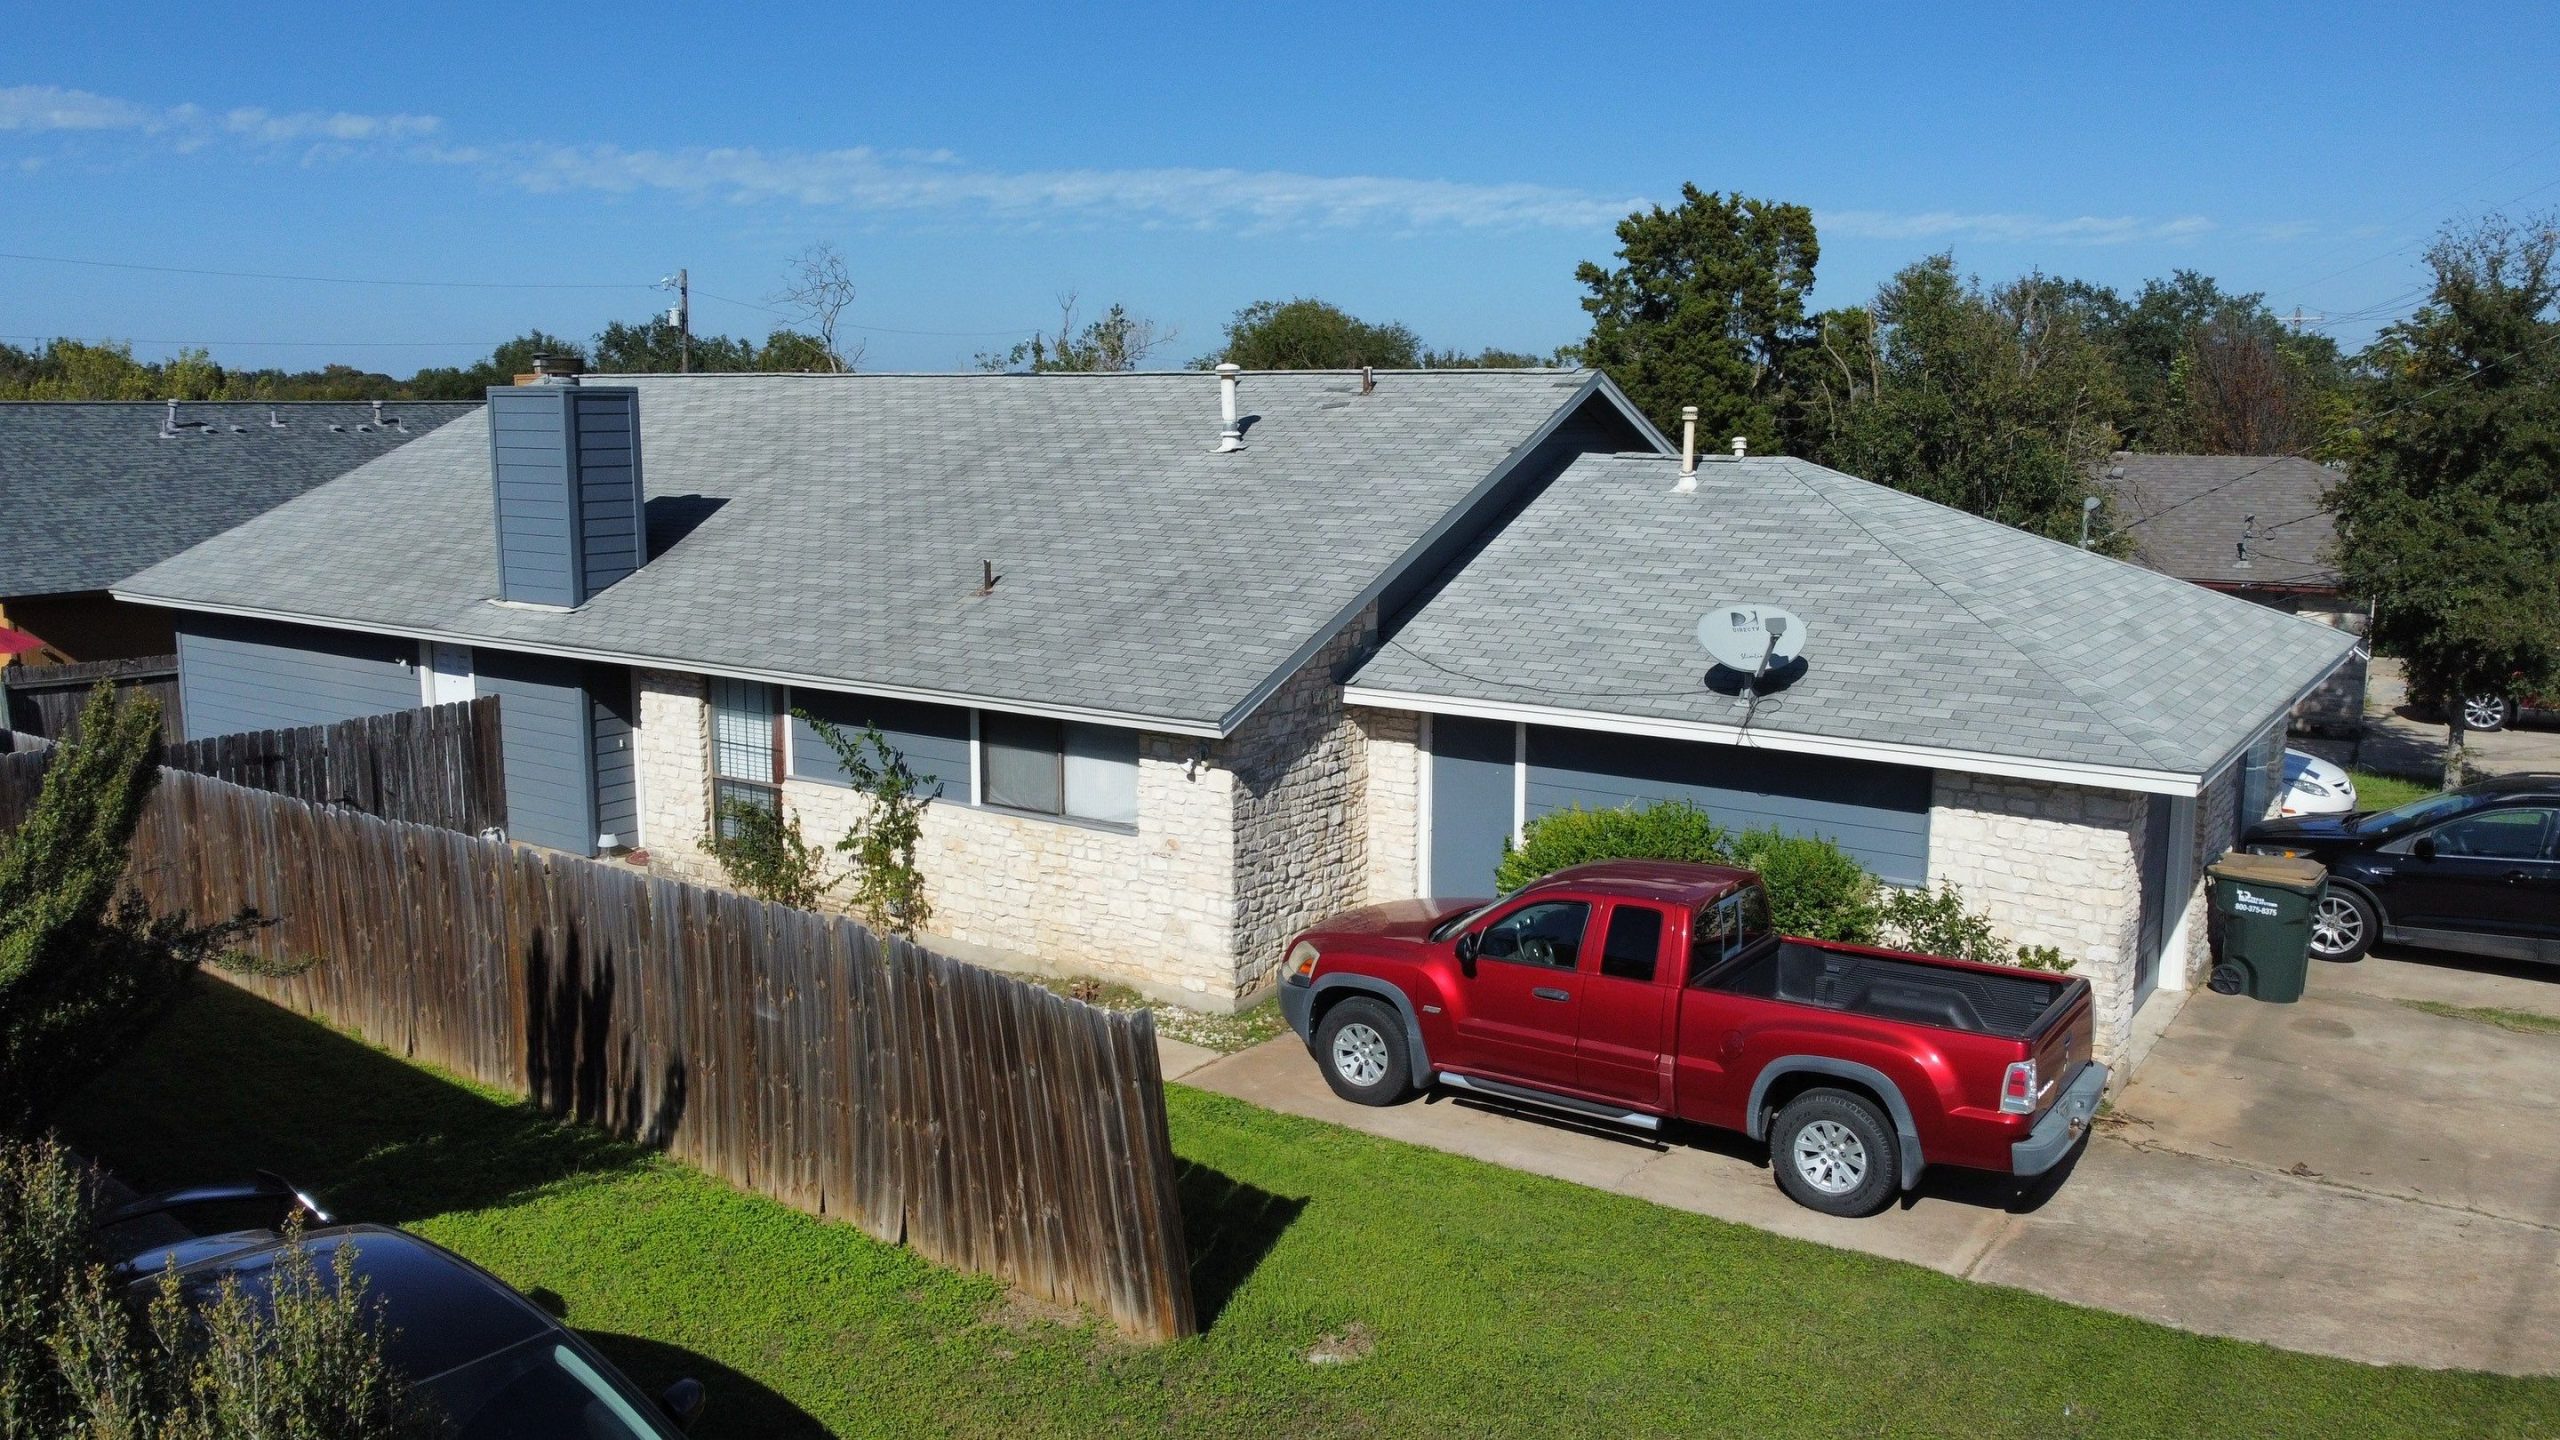 Greater Austin Roofing in Austin, Texas - Picture of New Shingle Roof